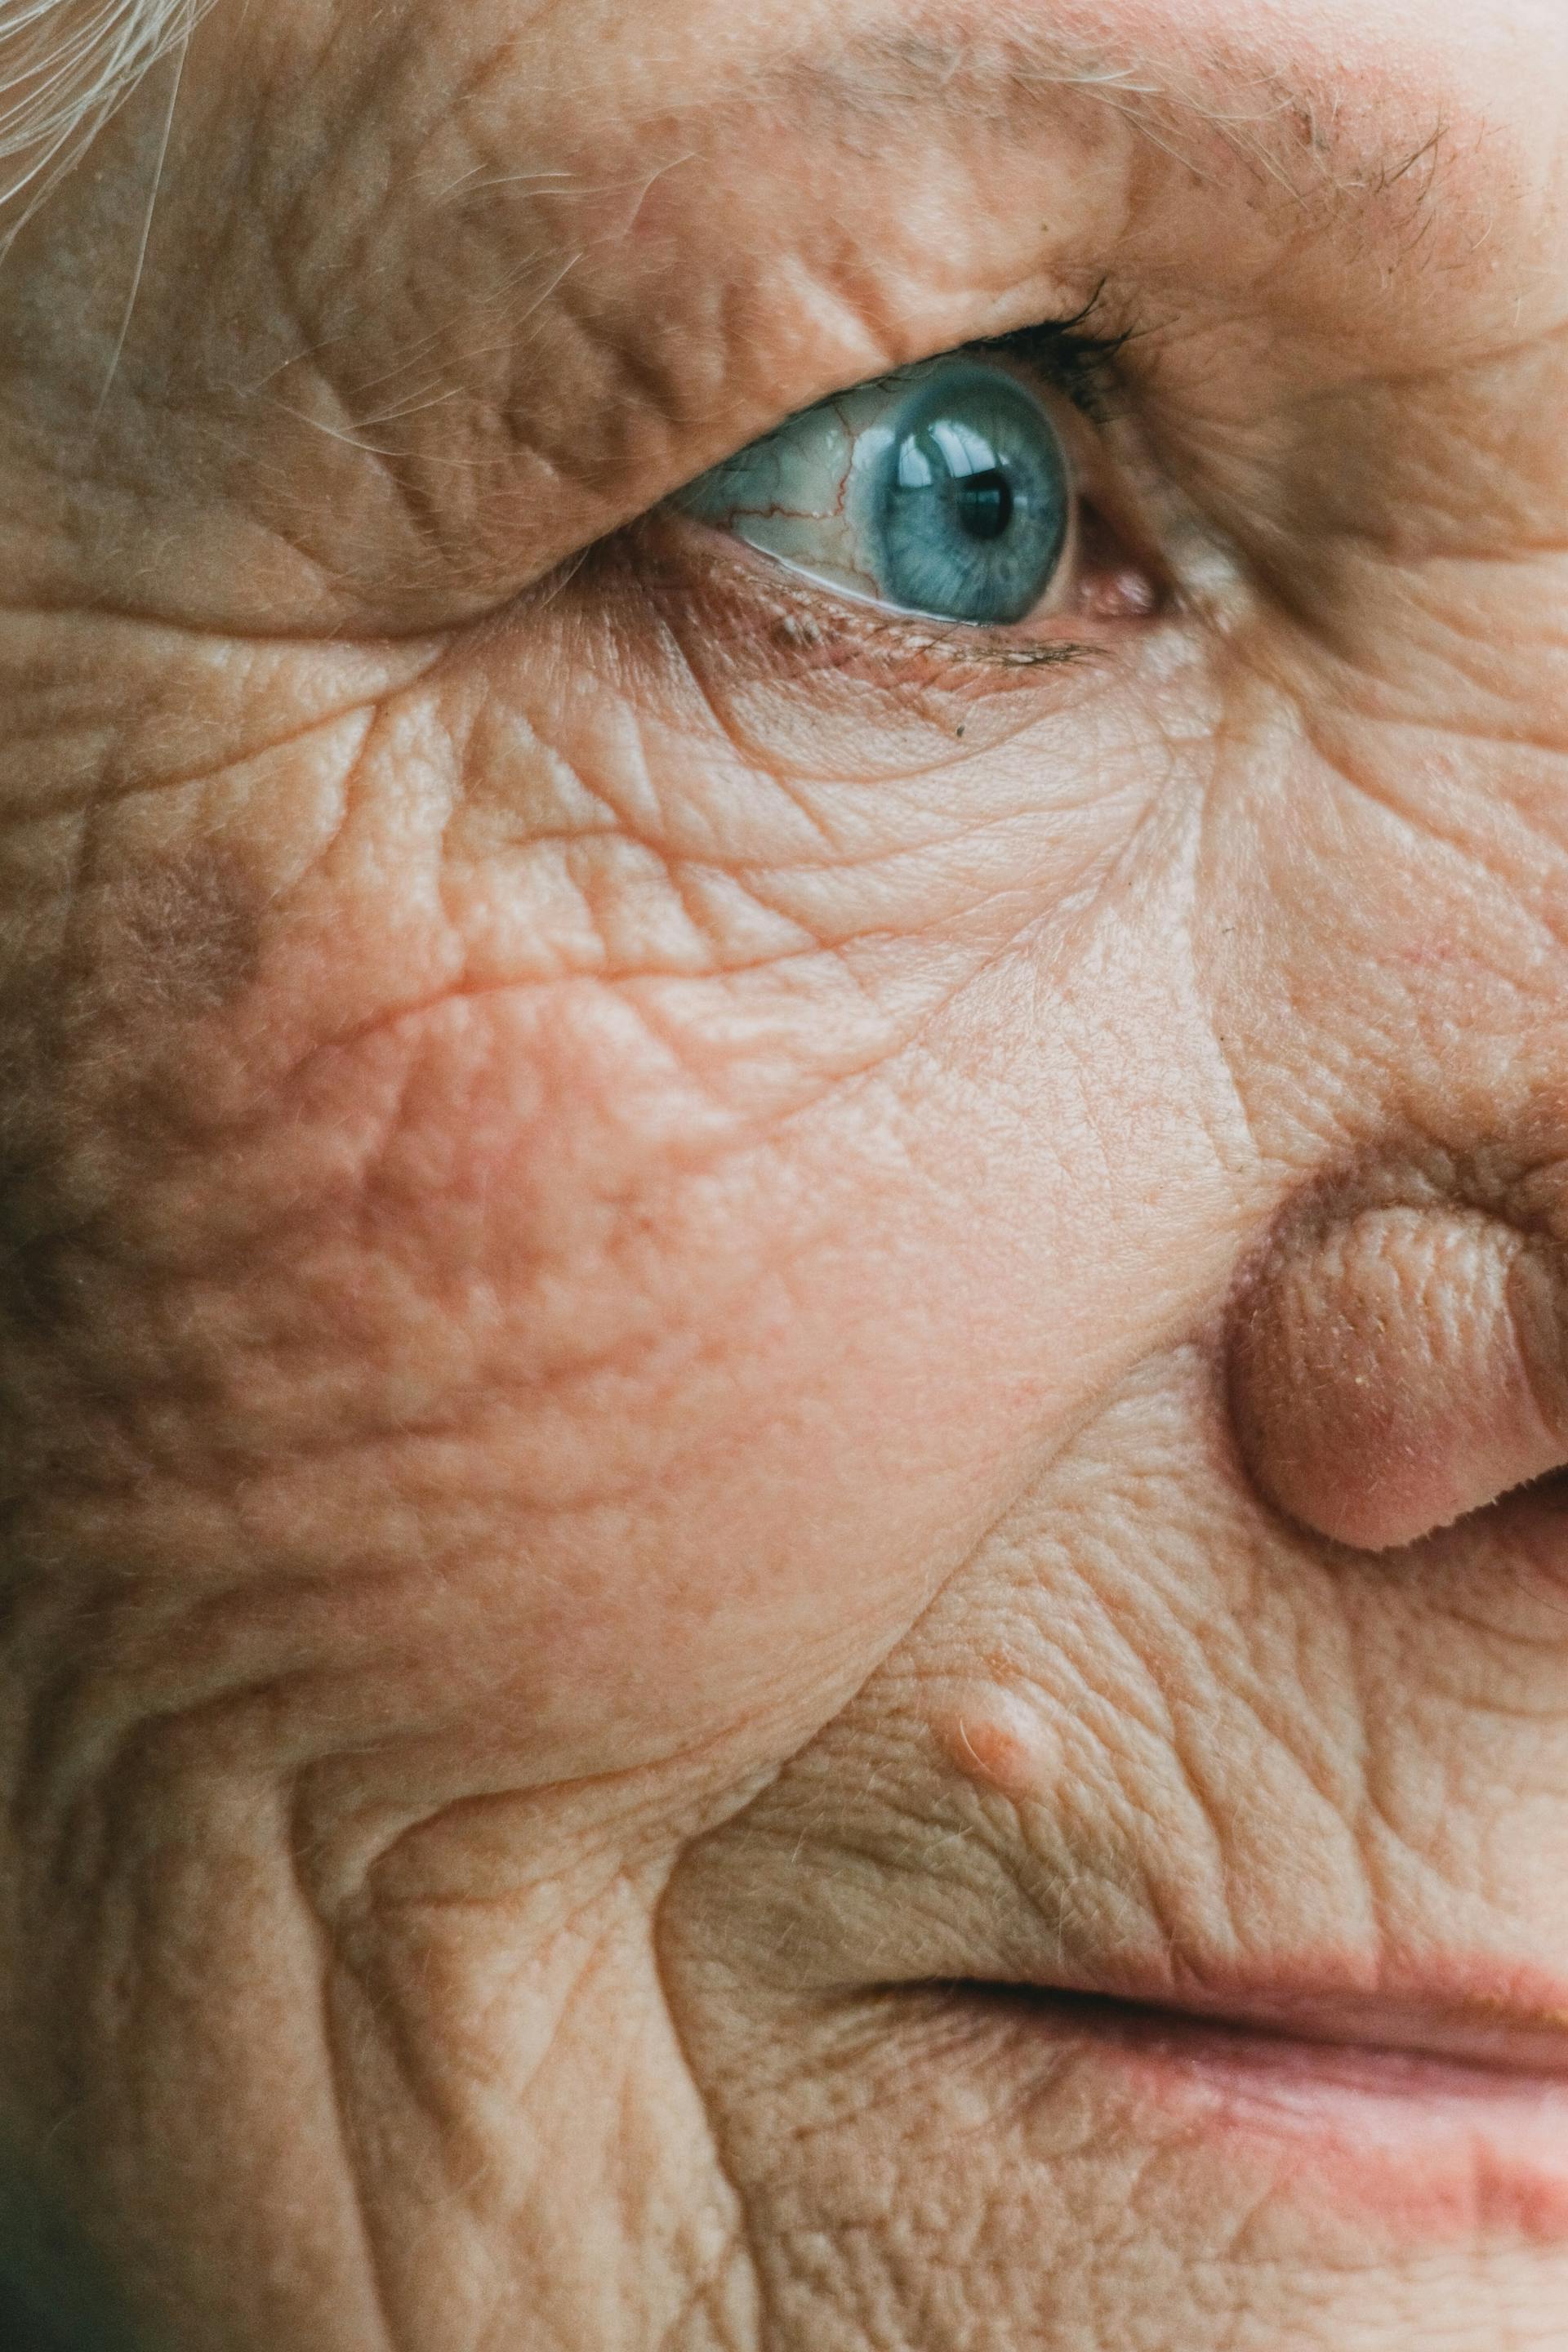 An older woman with a gentle smile | Source: Pexels